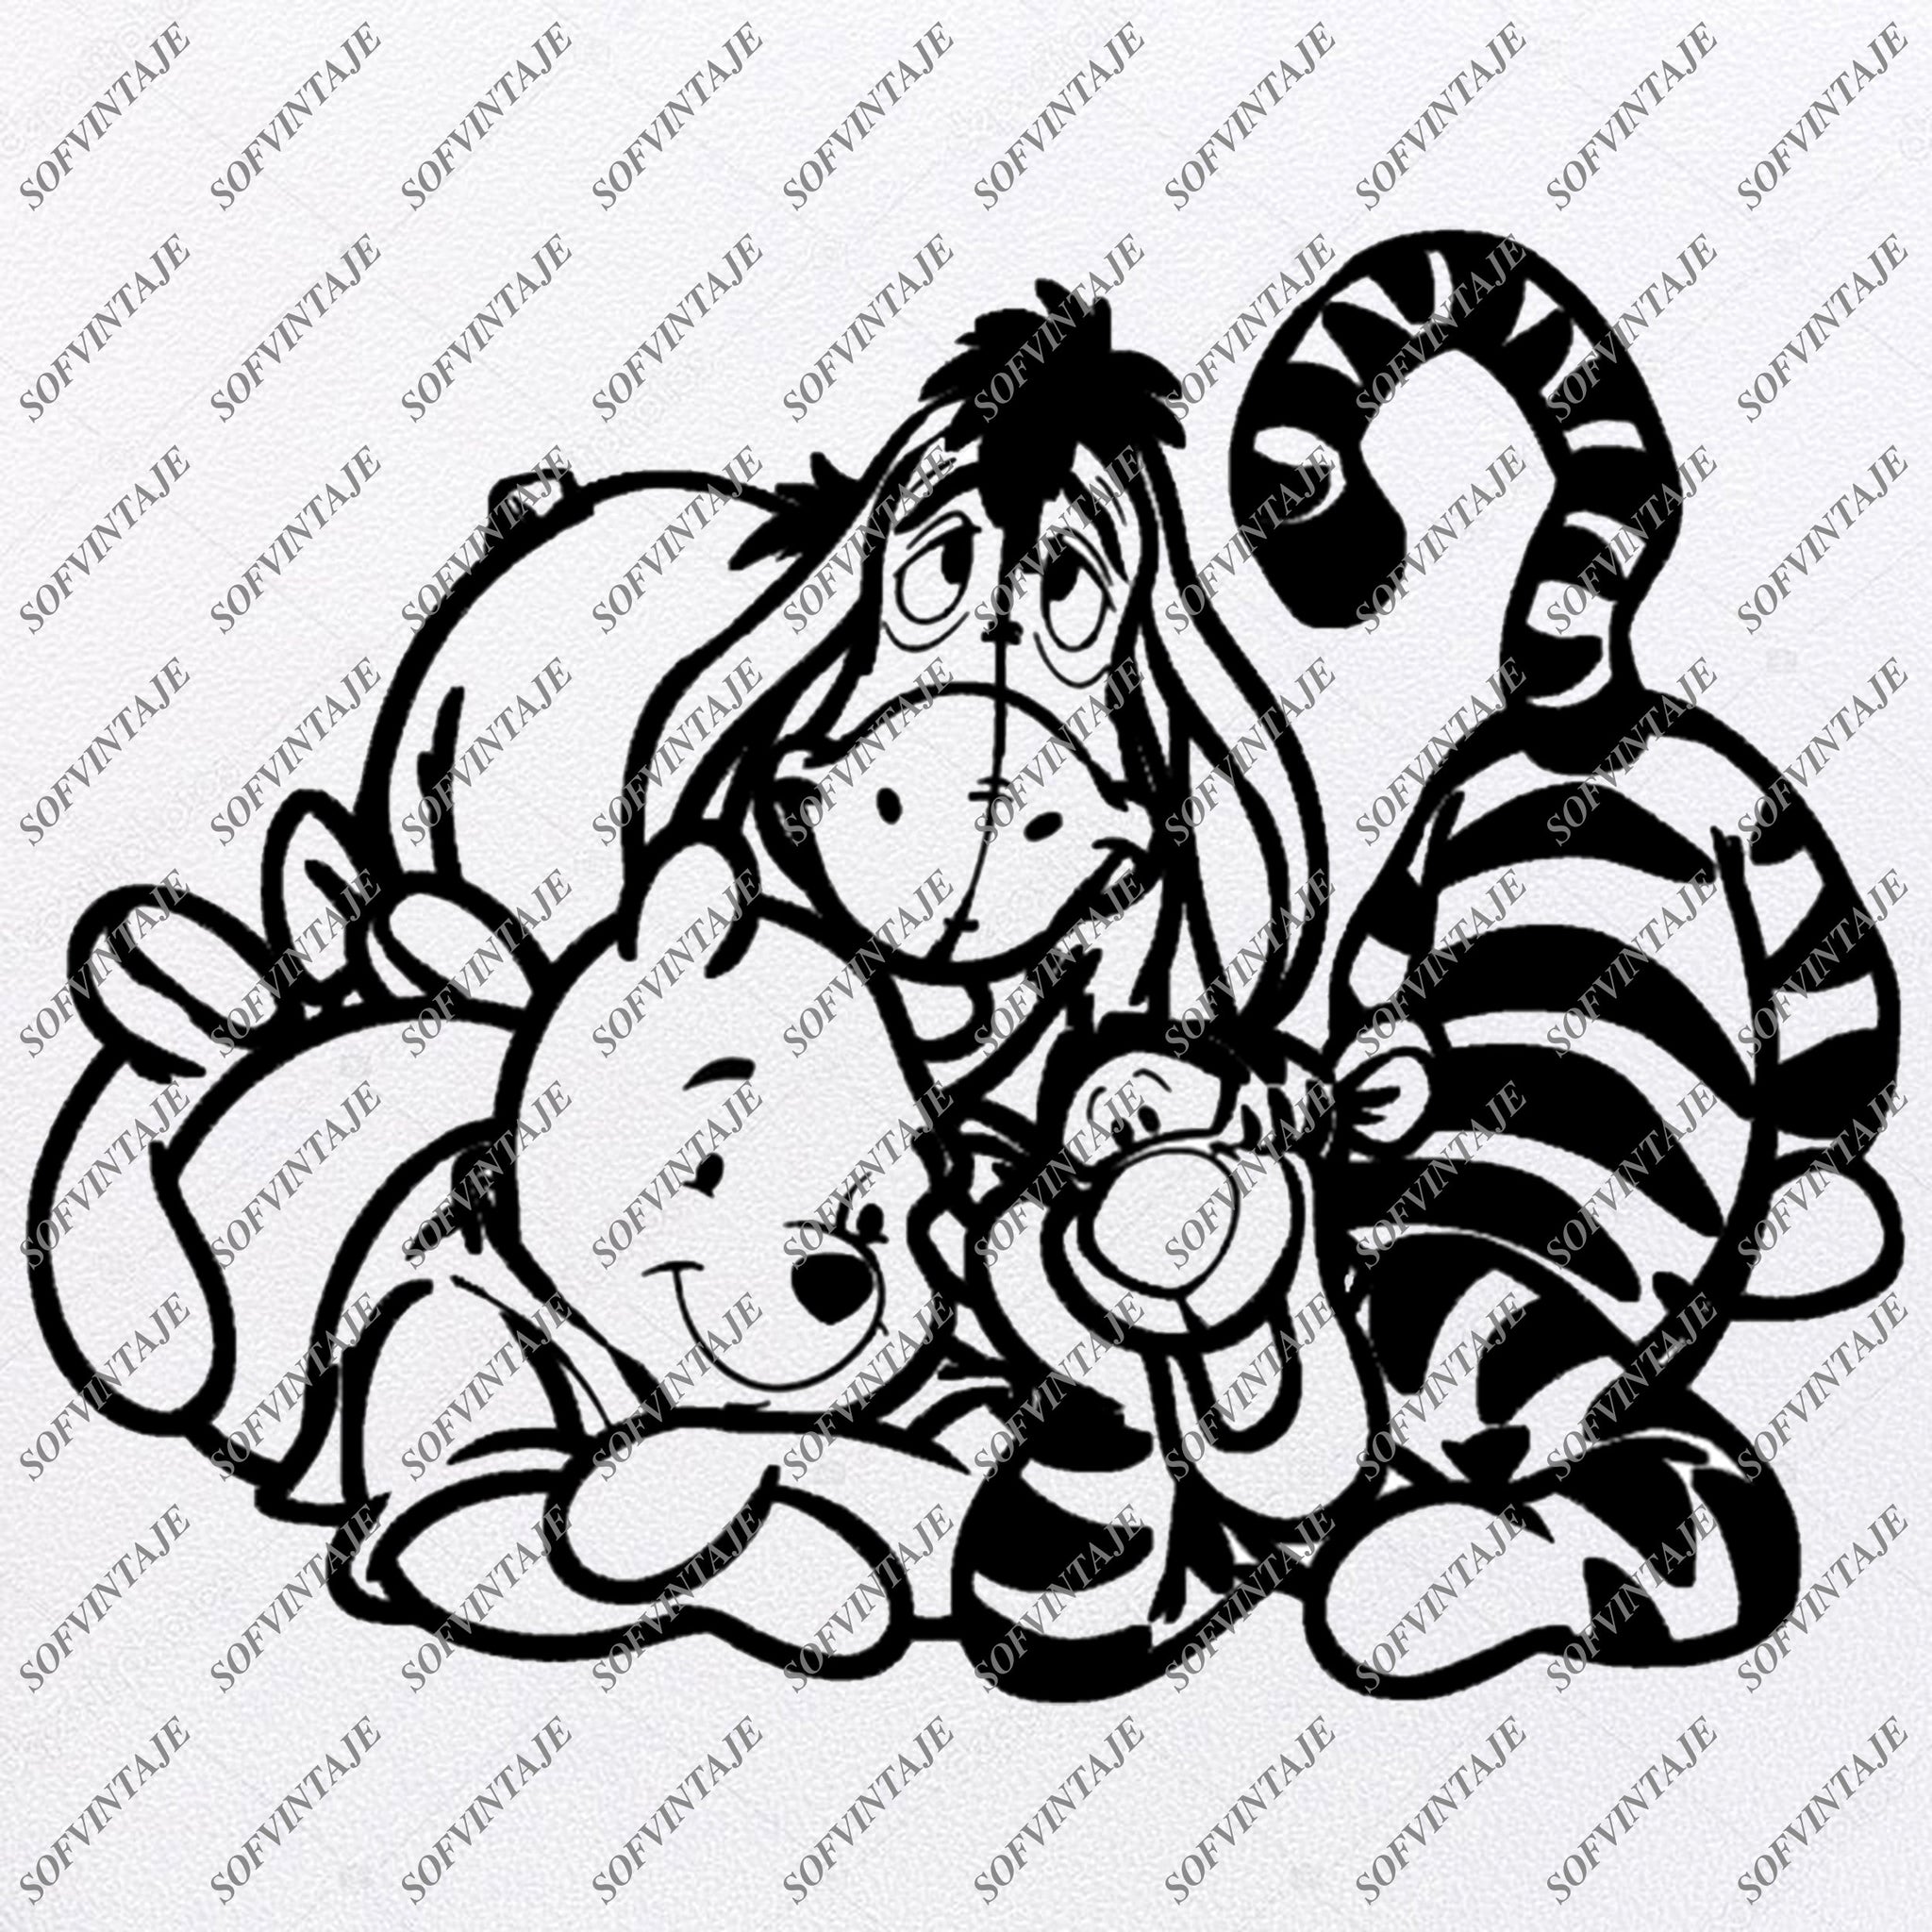 Download Winnie The Pooh Svg Files Winnie The Pooh Clipart Disney Character Sofvintaje